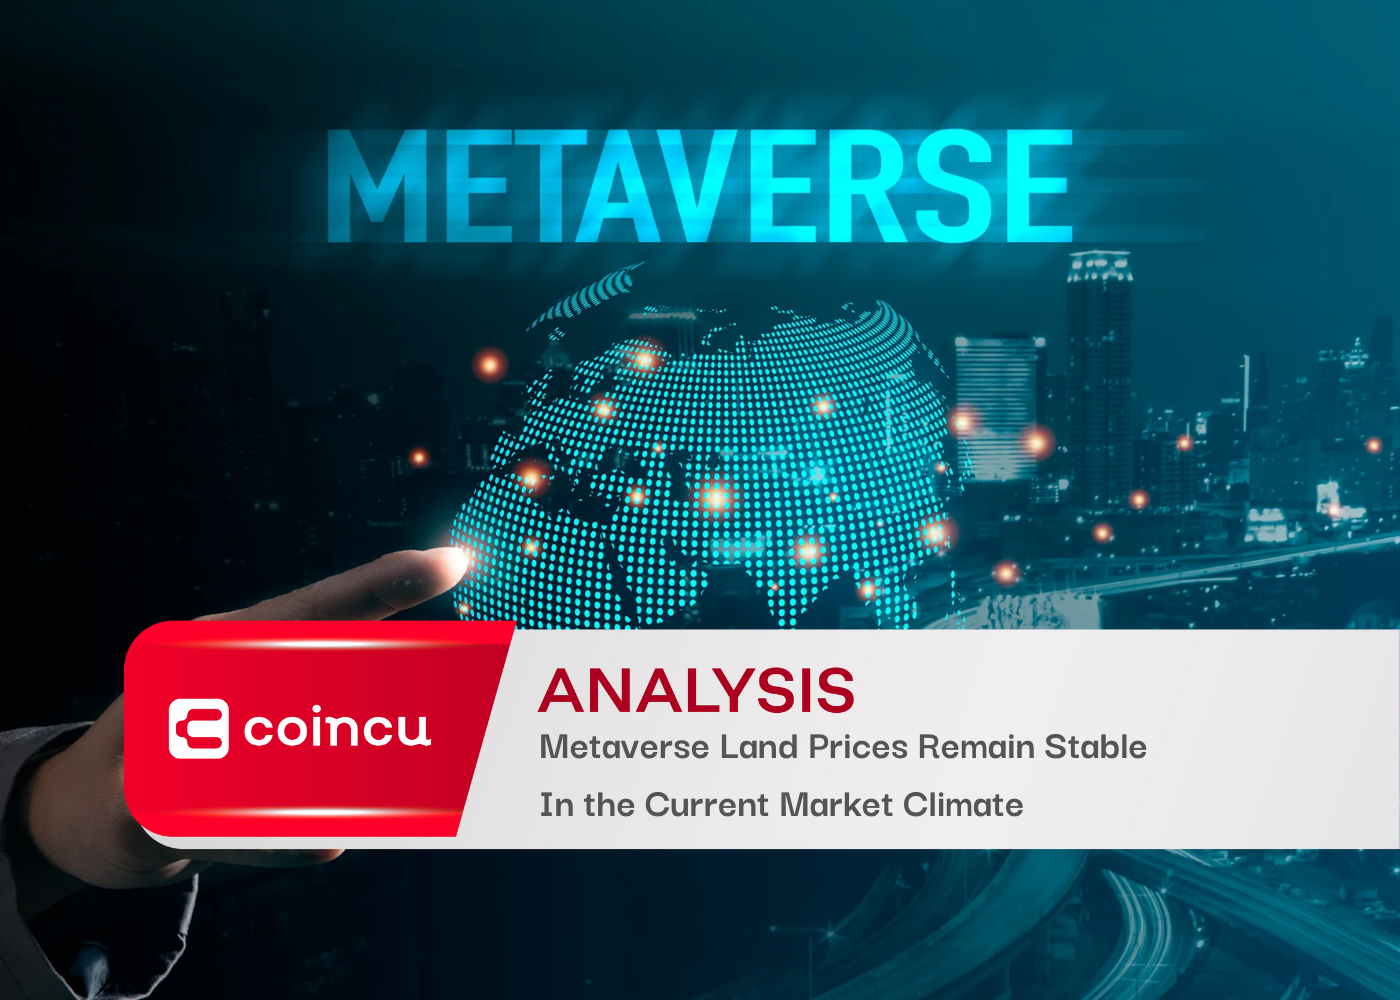 Metaverse Land Prices Remain Stable in the Current Market Climate